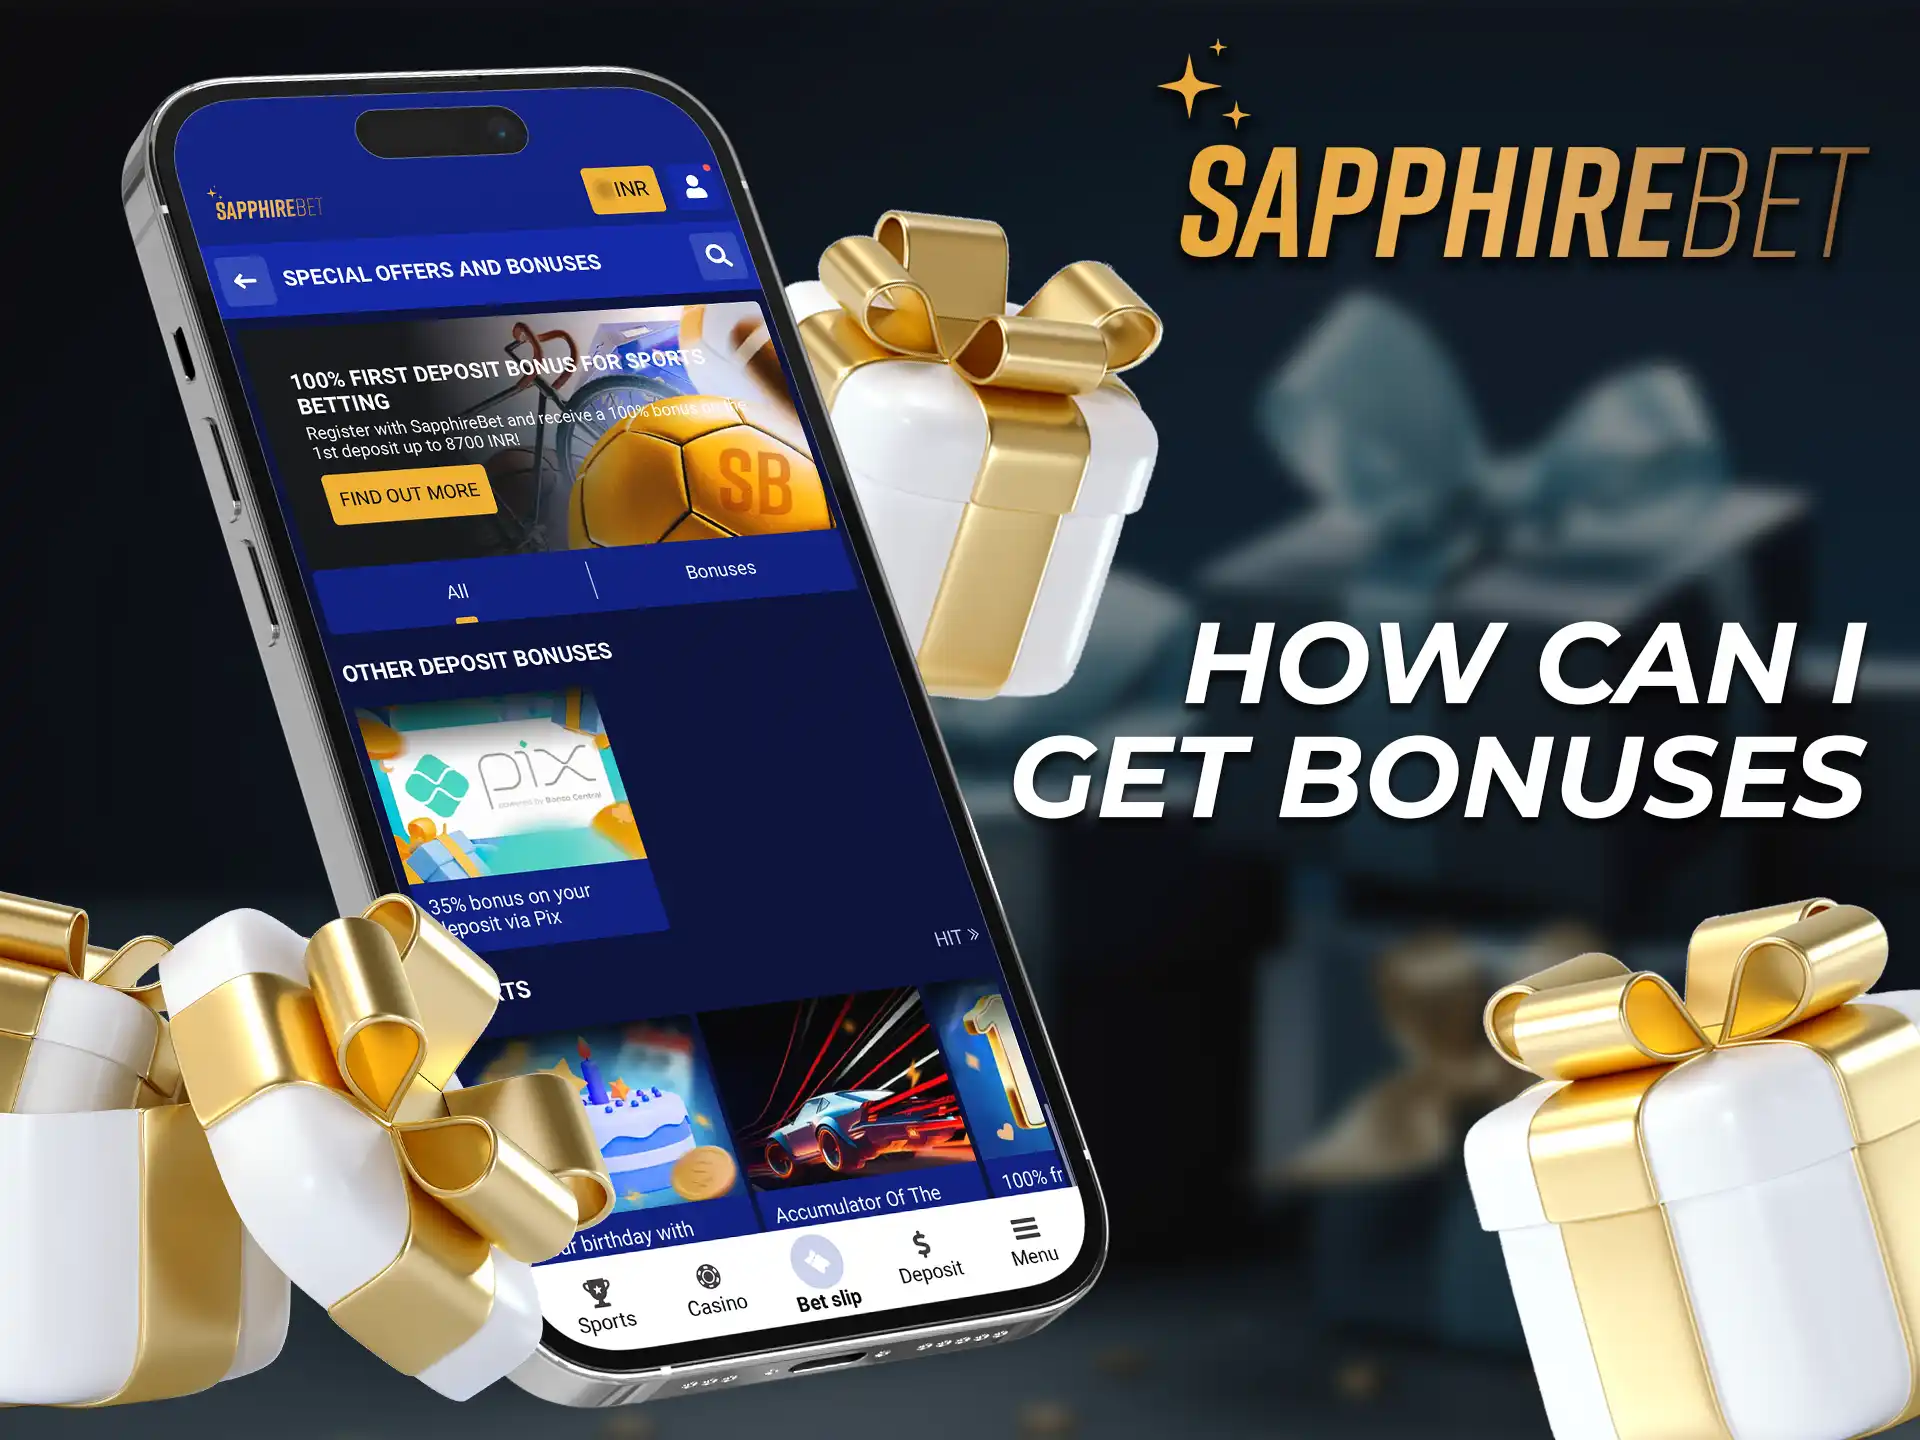 To get bonuses in the SapphireBet app, register an account and explore the available welcome bonuses.